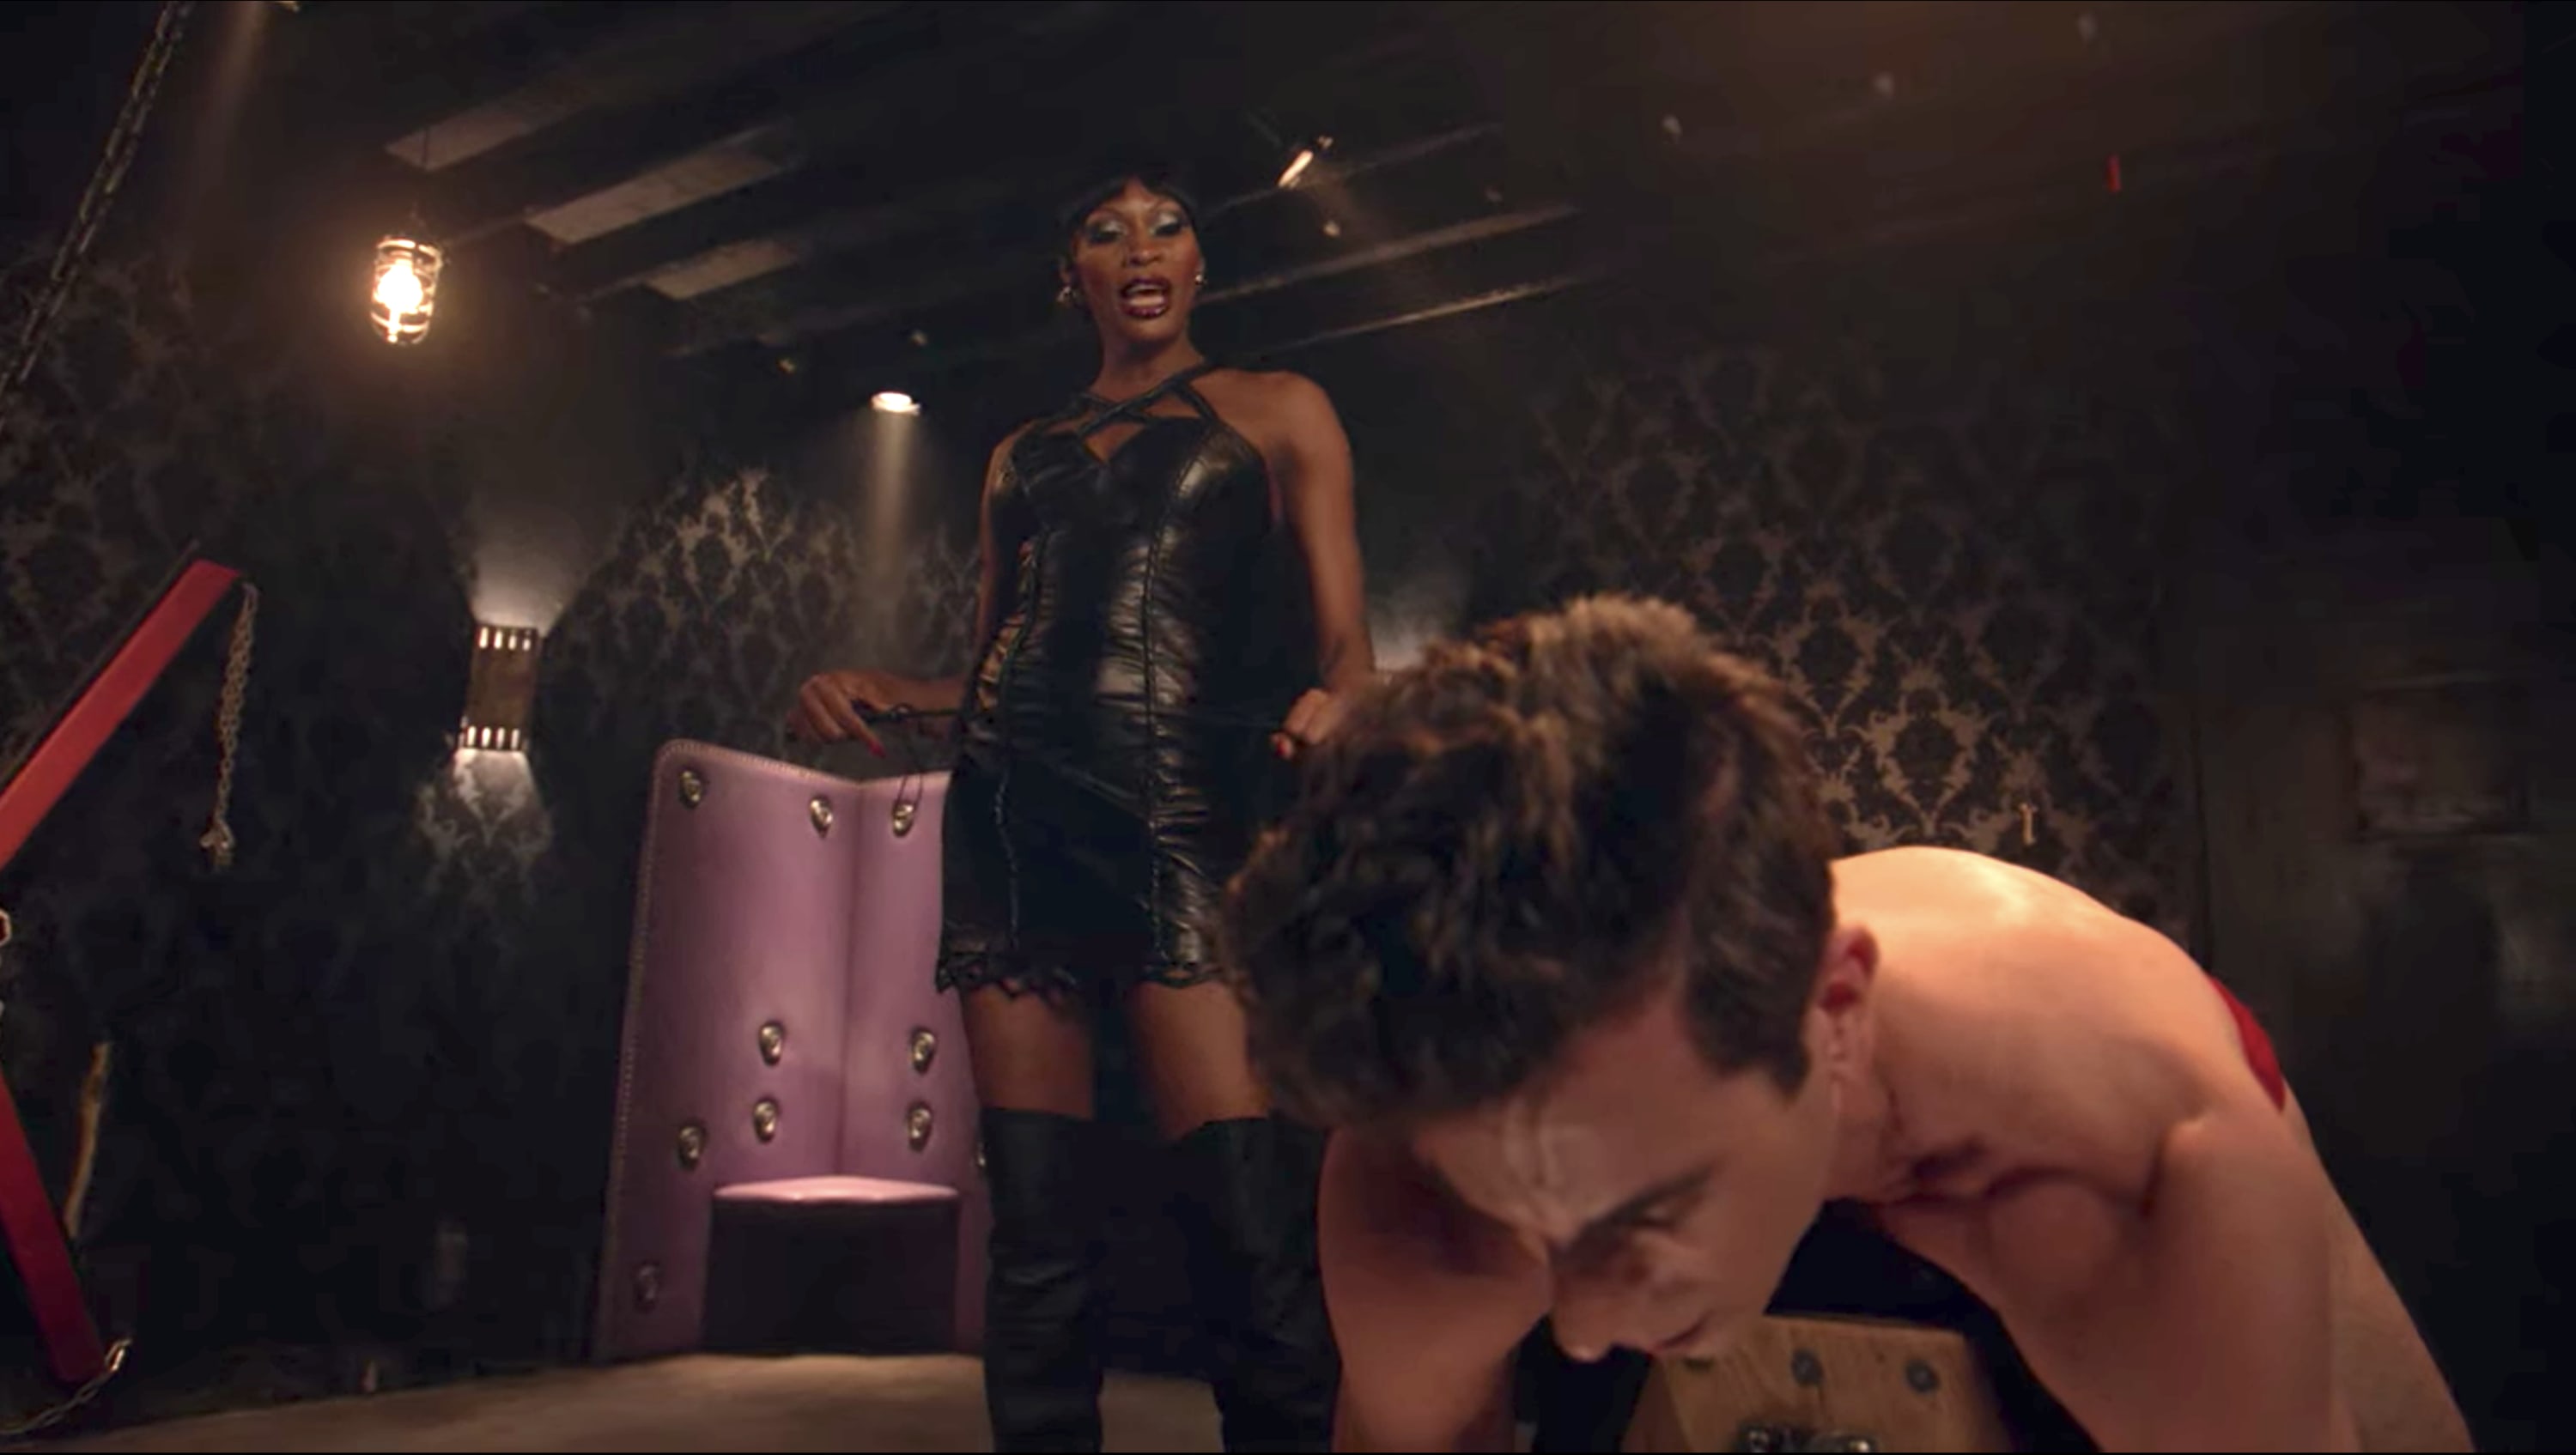 Dominique Jackson as Elektra is a dominatrix in "Pose" and stands over her submissive